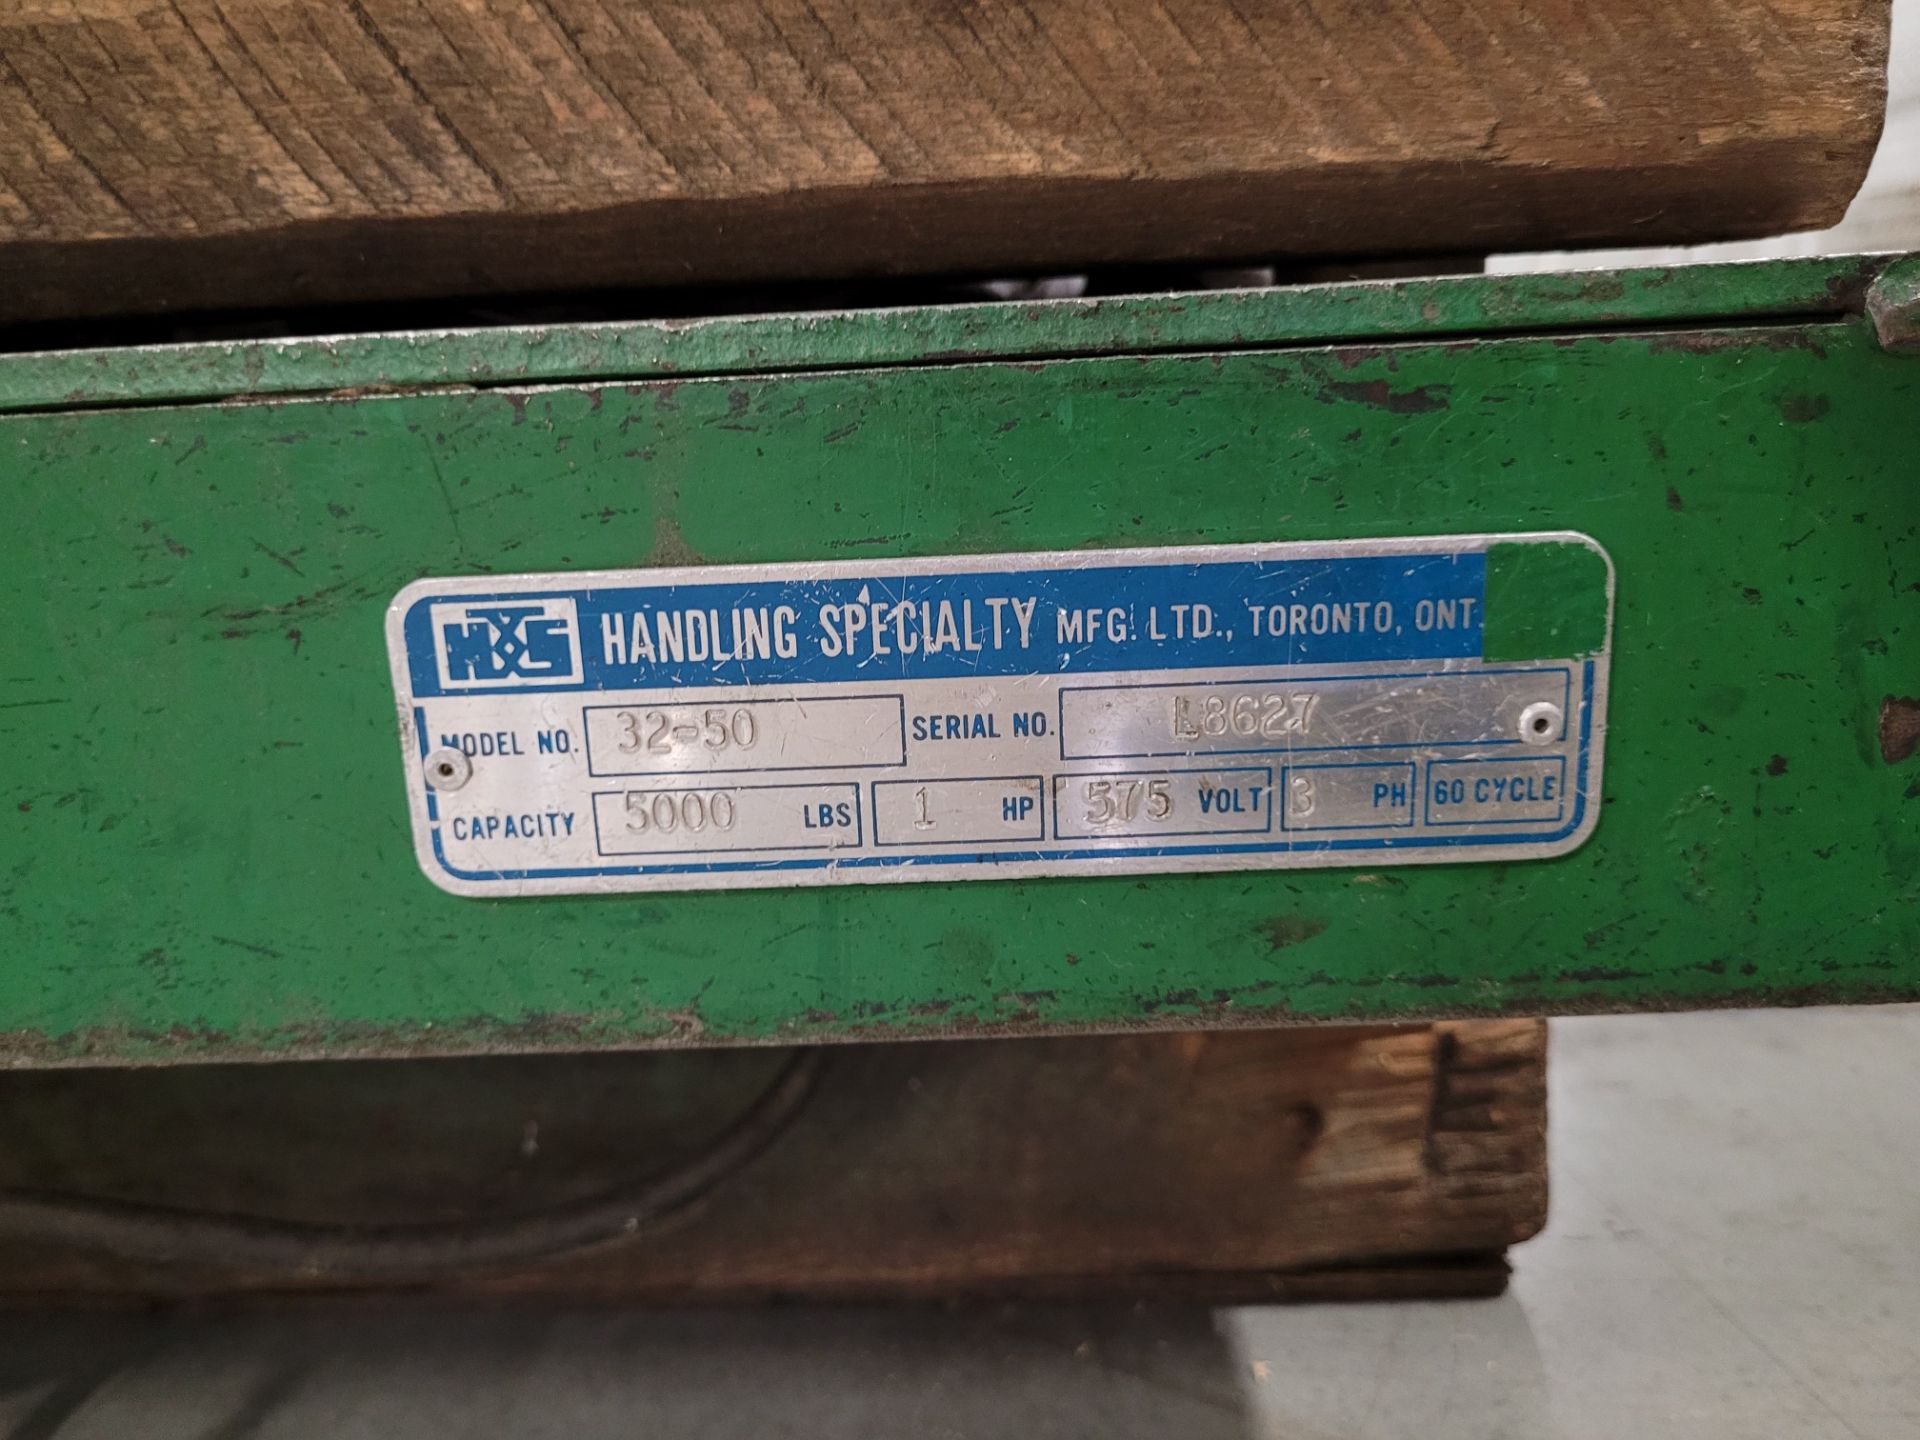 LOT OF (4) HANDLING SPECIALTY SCISSOR LIFT TABLES (CONDITION UNKNOWN) - Image 5 of 5